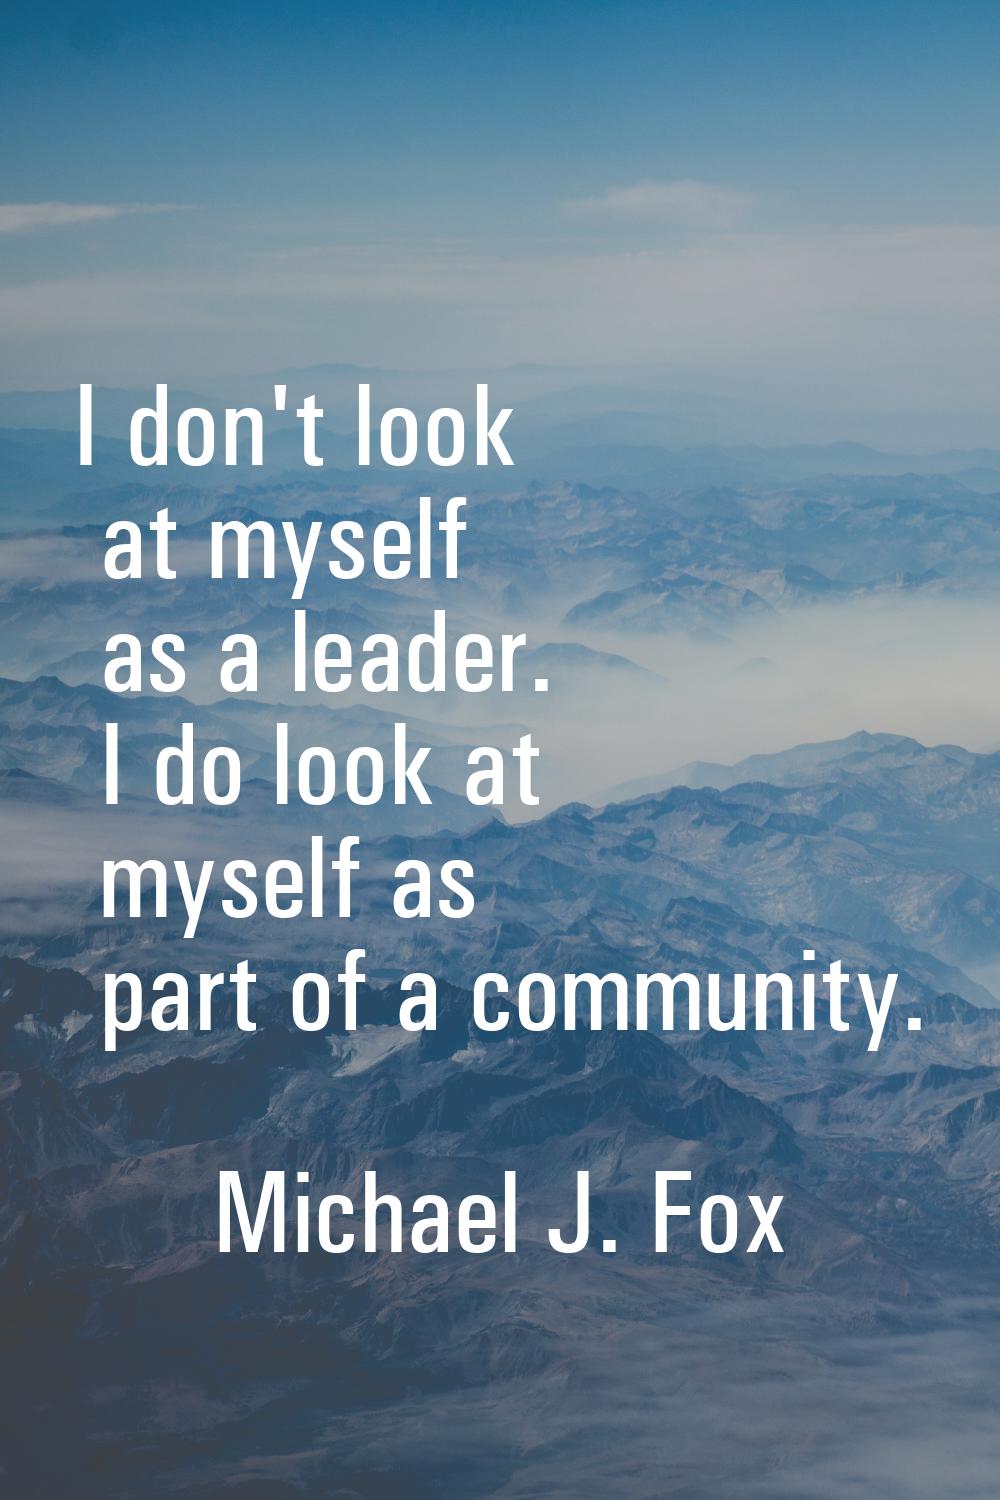 I don't look at myself as a leader. I do look at myself as part of a community.